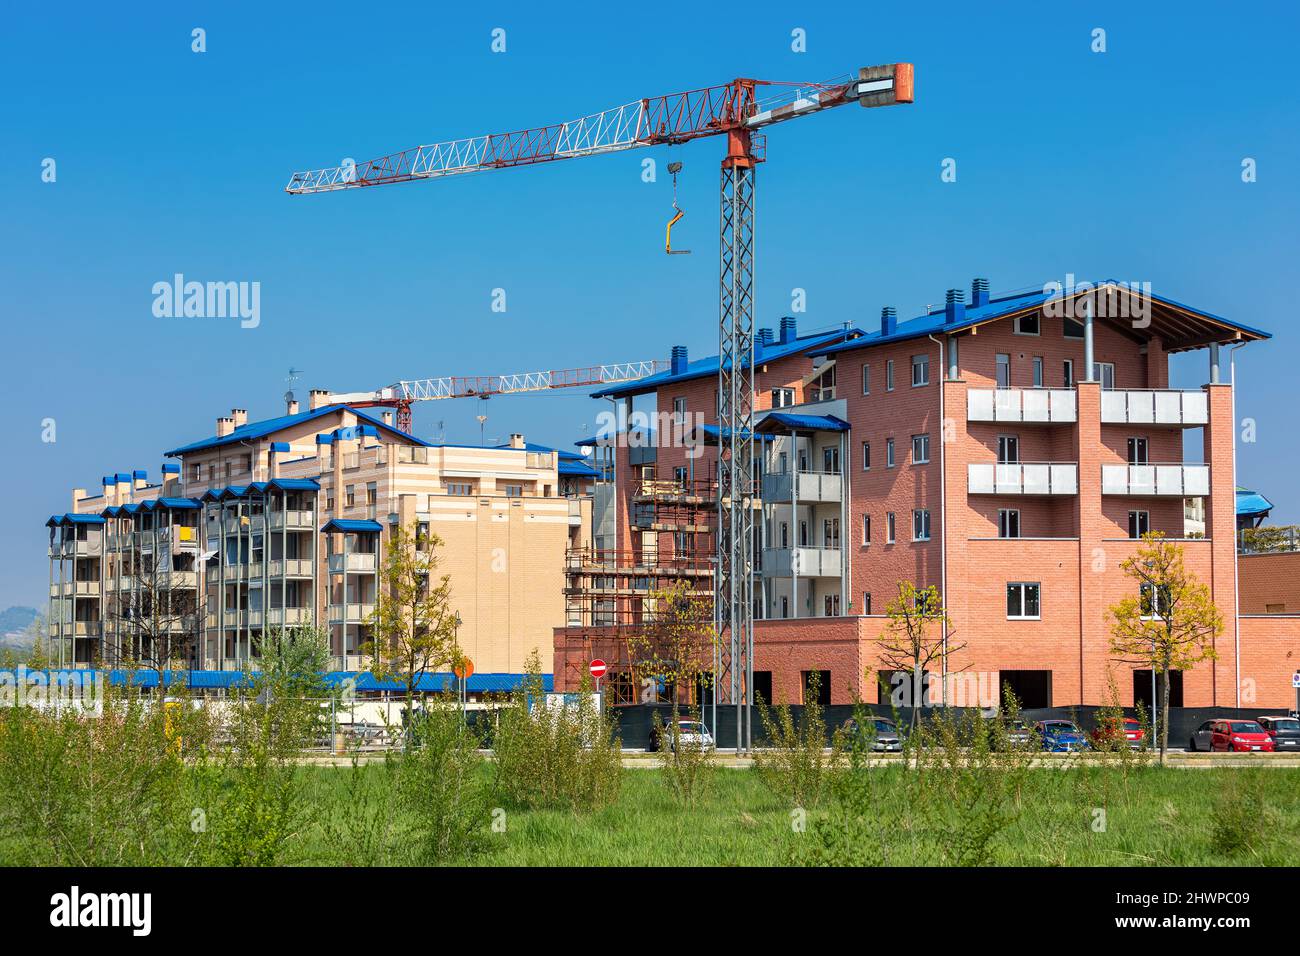 Construction cranes and new residential buildings under blue sky in Alba, Piedmont, Northern Italy. Stock Photo